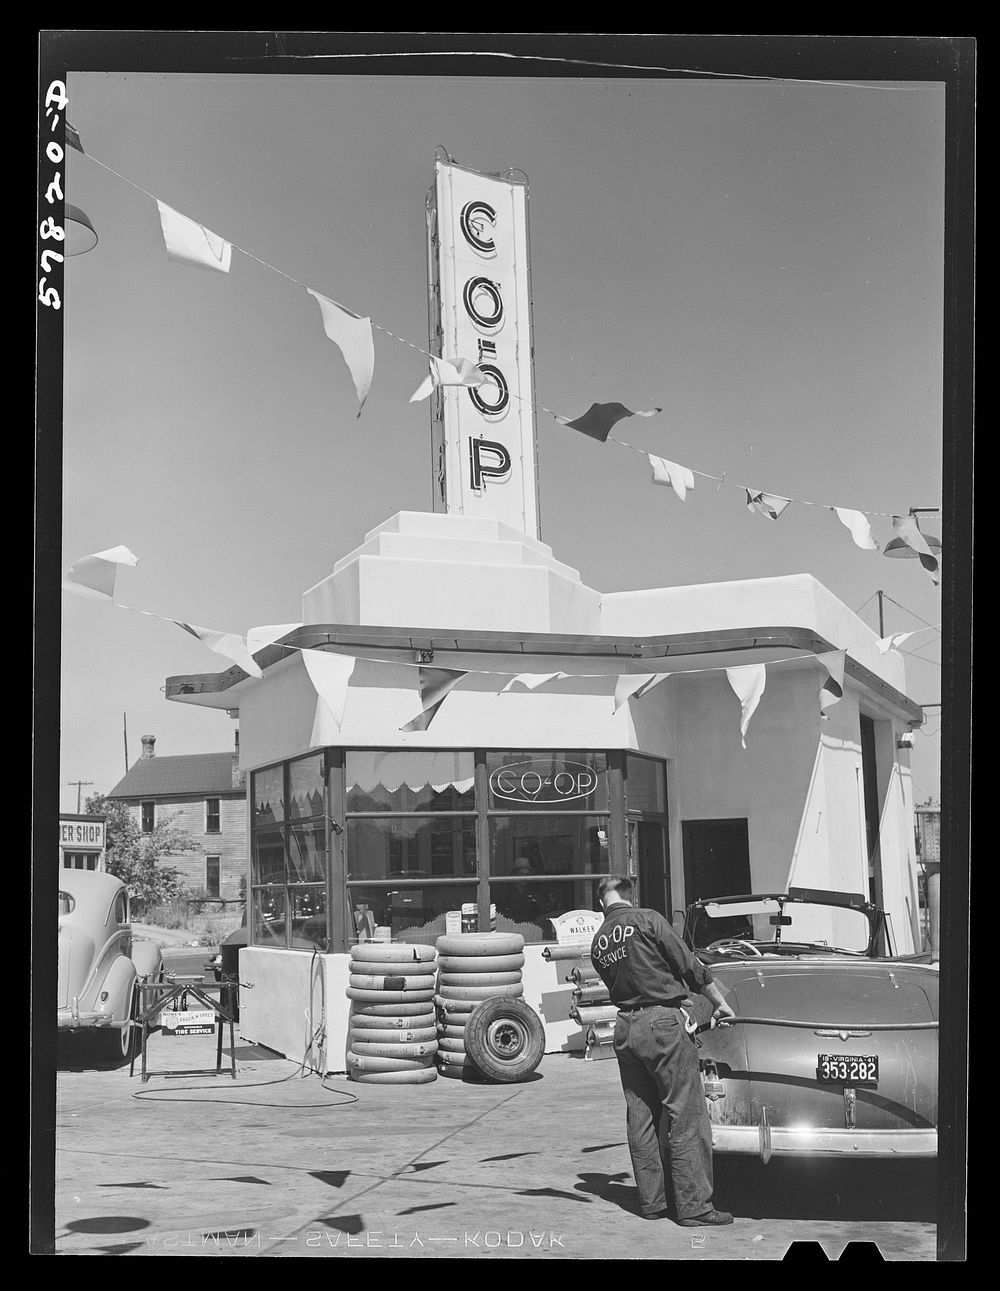 Cooperative gas station in Minneapolis, Minneapolis. Sourced from the Library of Congress.